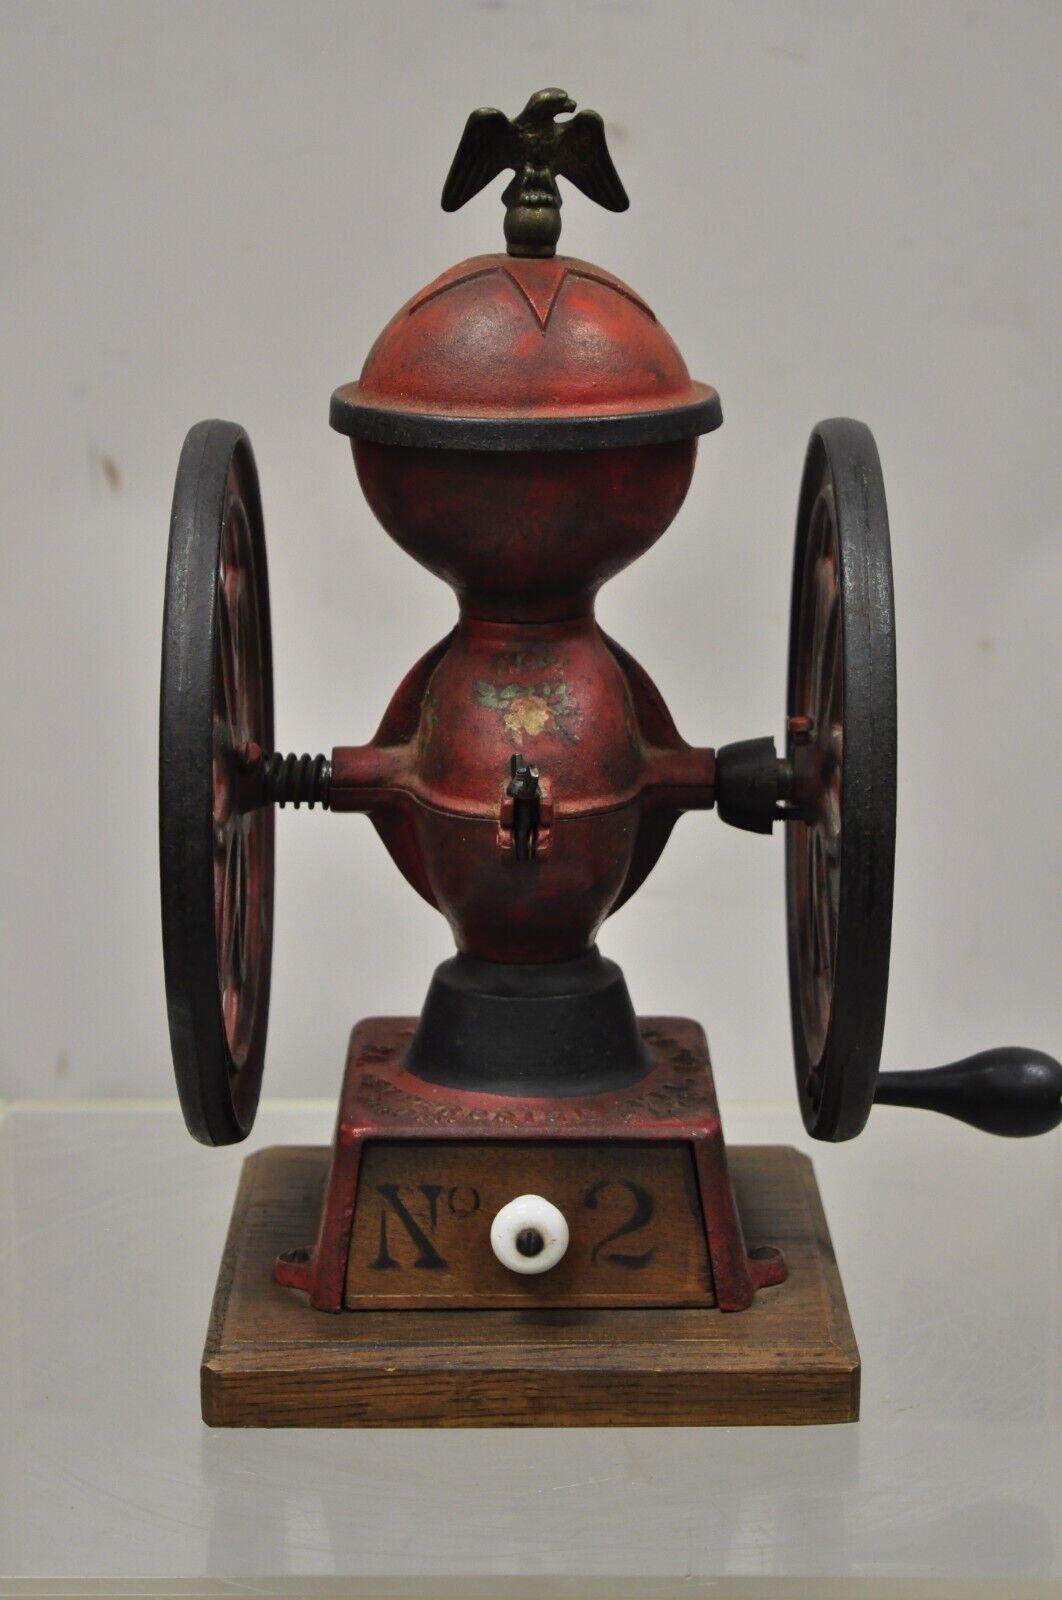 Vintage Recast of the Enterprise Mfg No.2 Red Black Cast Iron Coffee Grinder. I am told this recast was done for members of ACME (Association of Coffee Mill Enthusiasts). Item features a brass eagle finial, red and black painted finish, blue painted